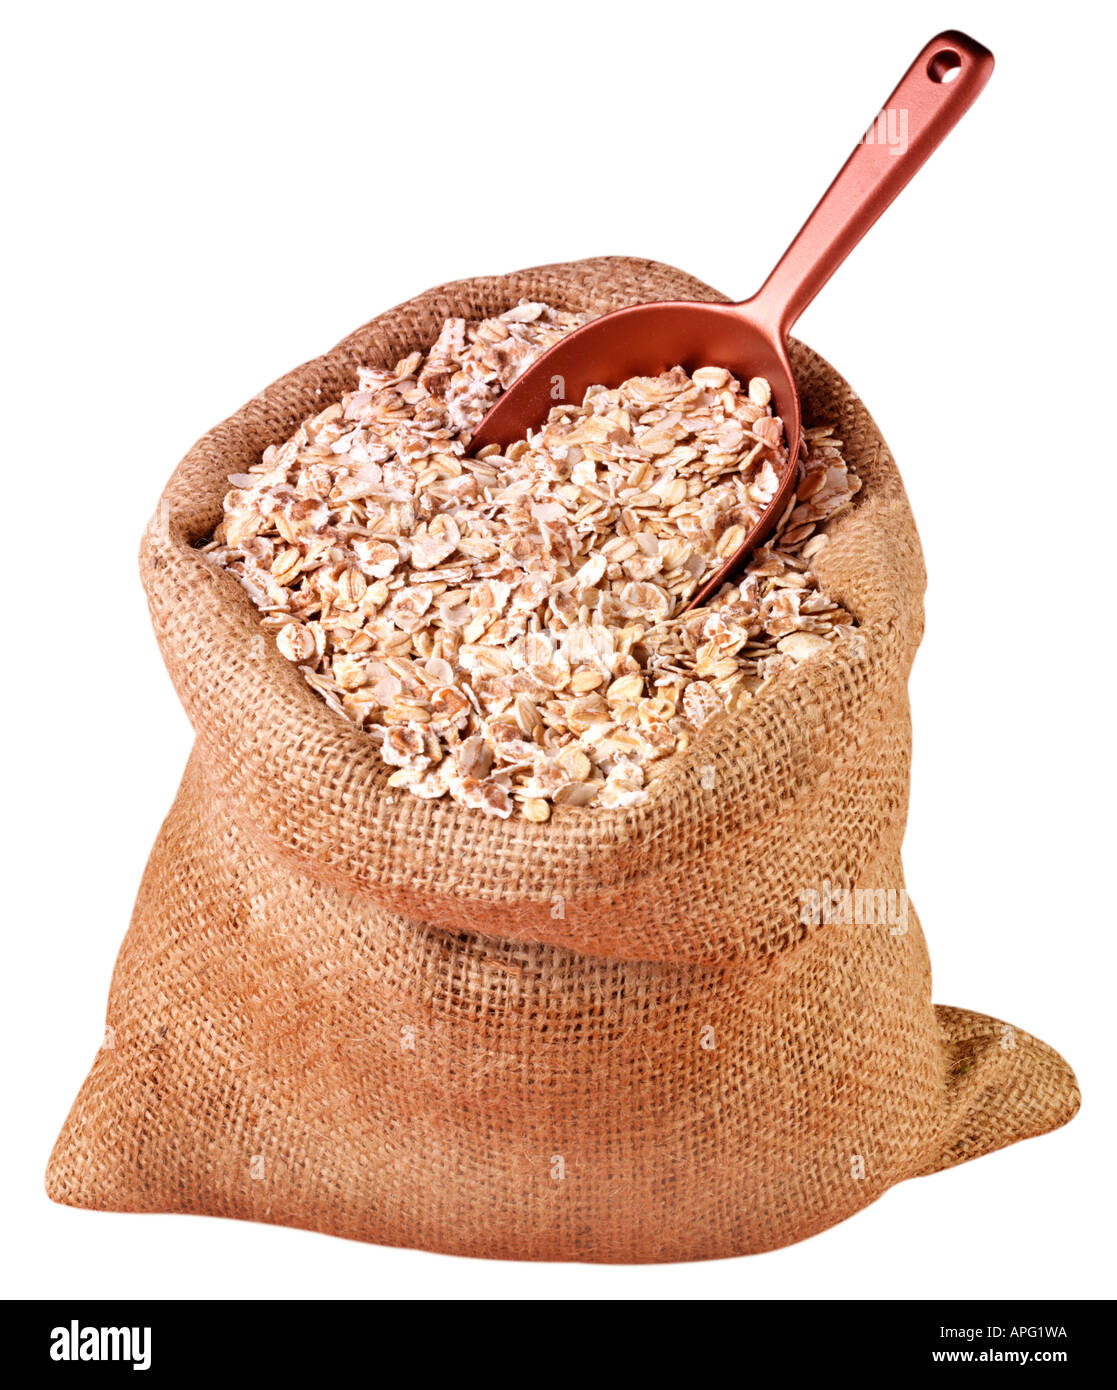 SACK OF OATS CUT OUT Stock Photo